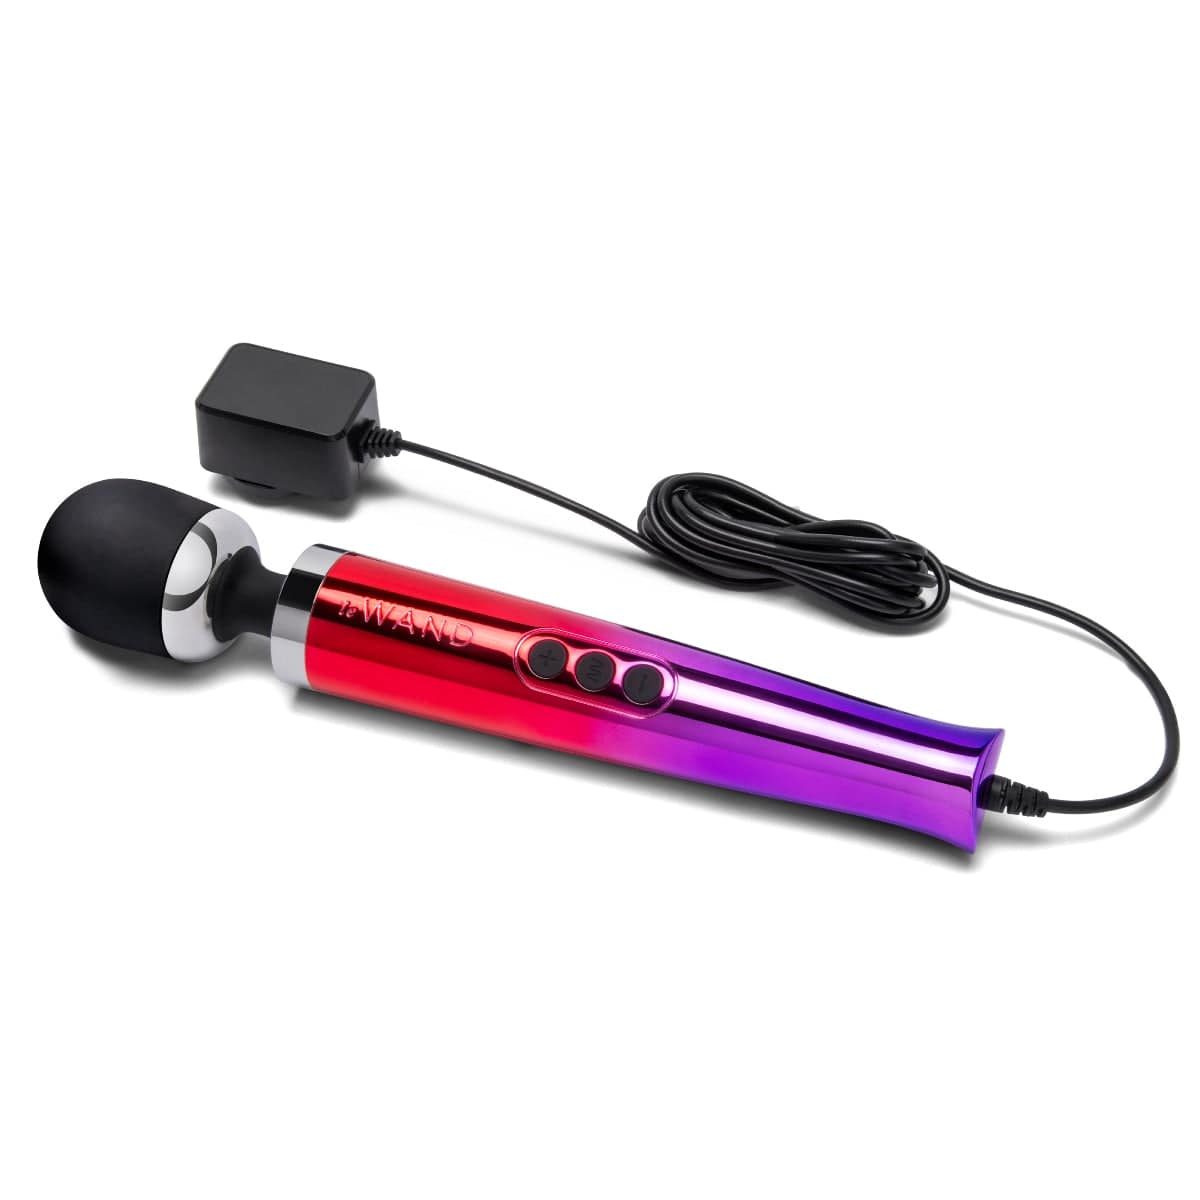 Le Wand Diecast Plug-In Vibrating Massager Wand - OMBRE le wand - For Me To Love